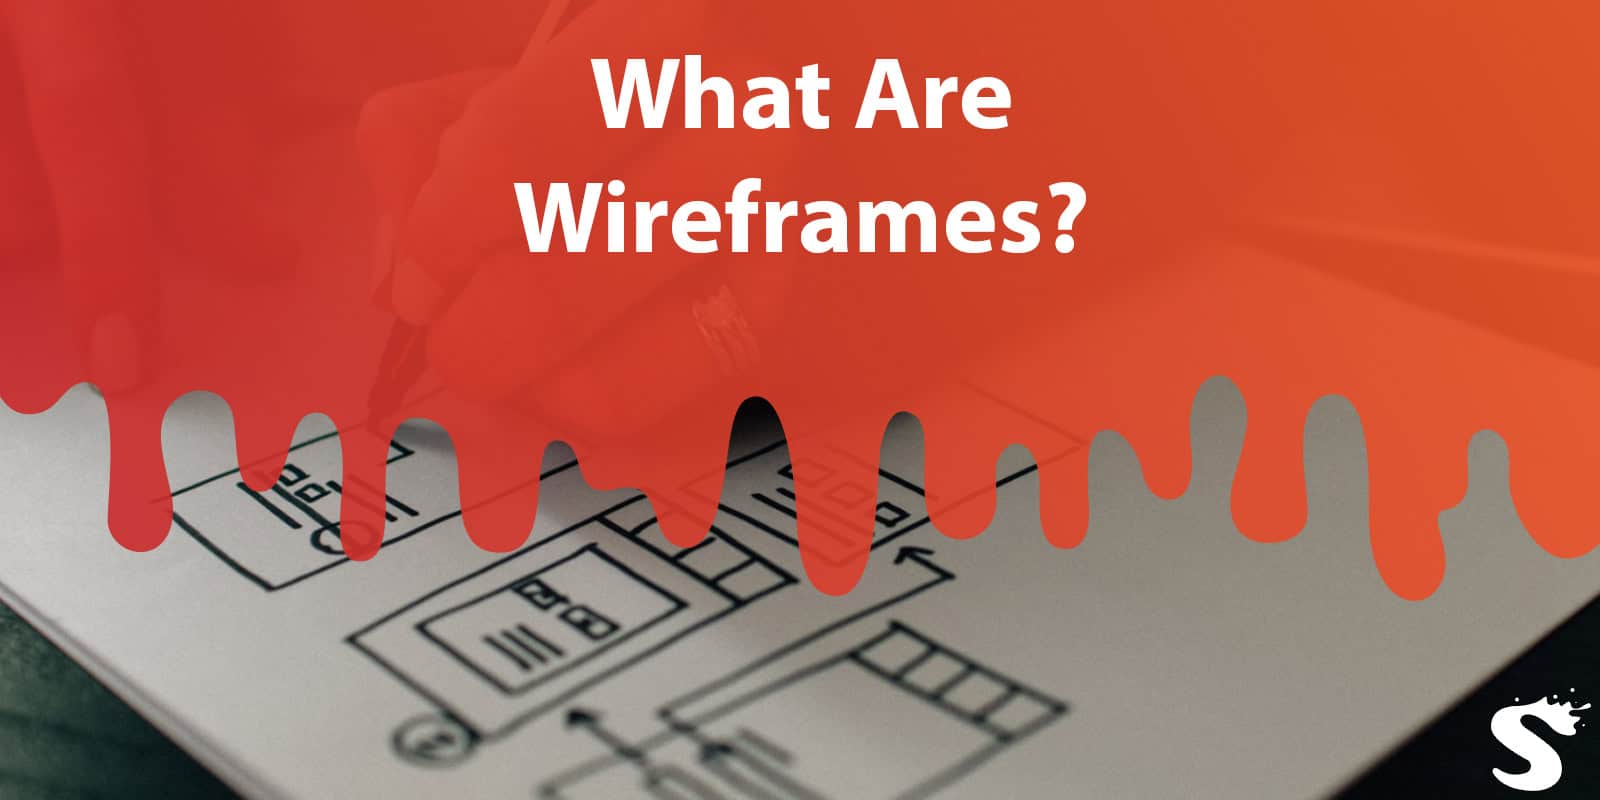 What Are Wireframes?